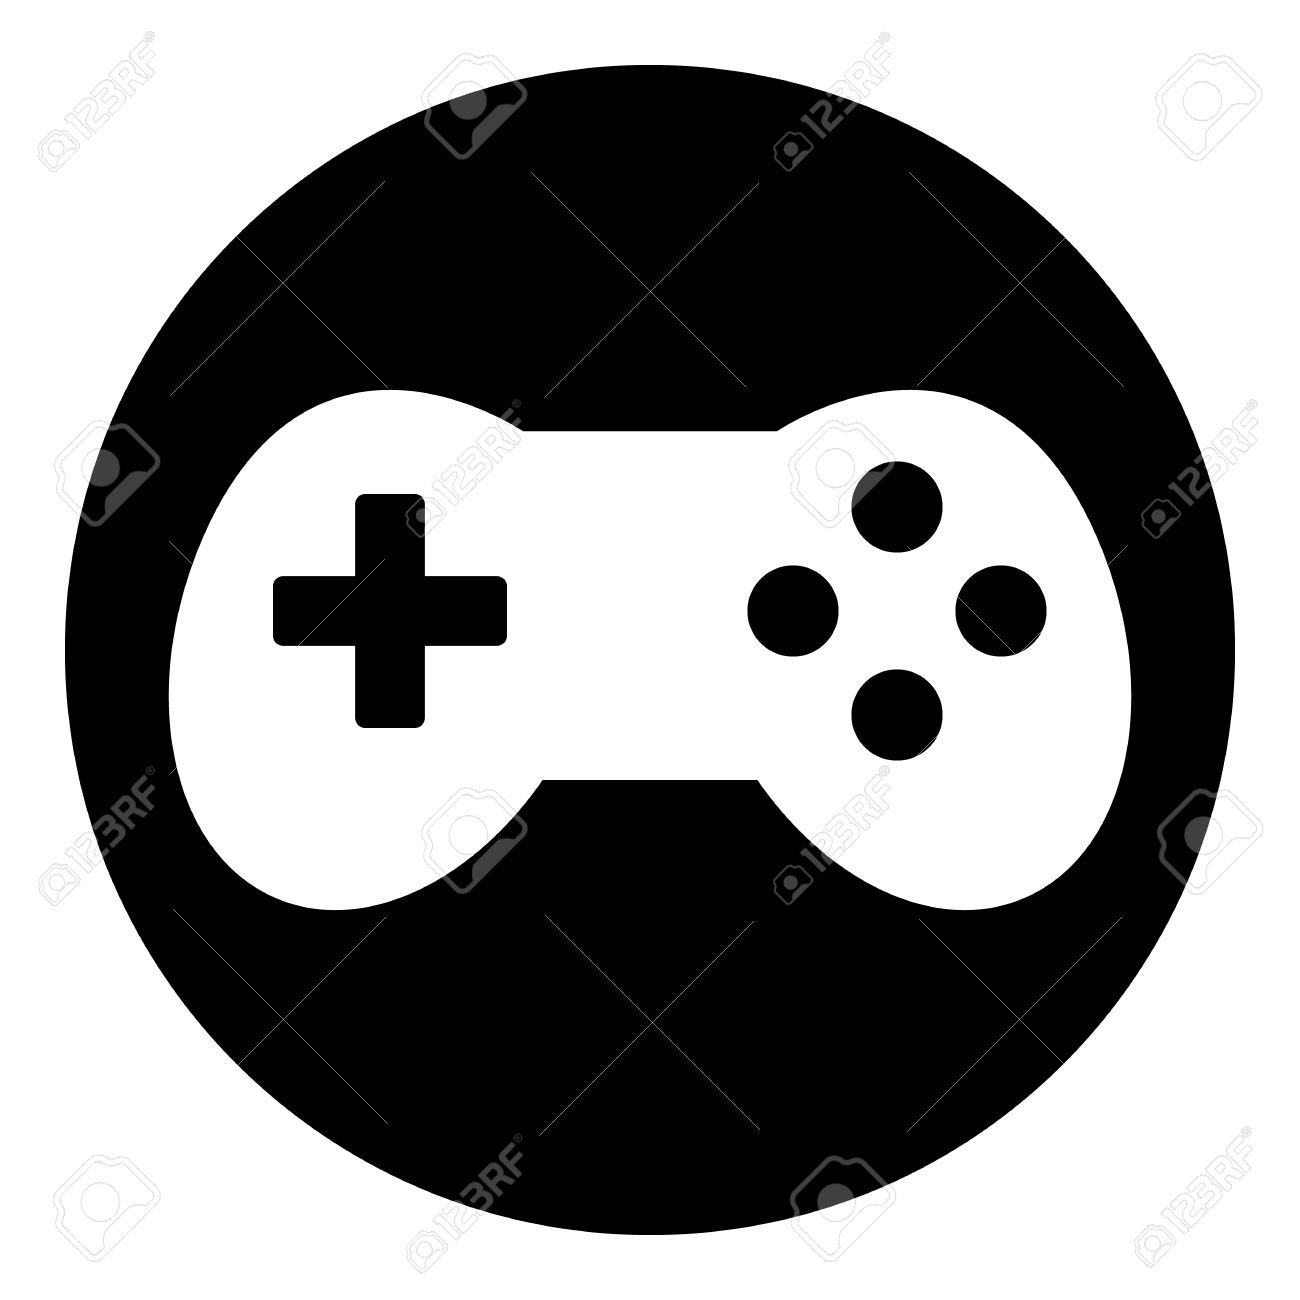 Free Game Icons Vector - Download Free Vector Art, Stock Graphics 